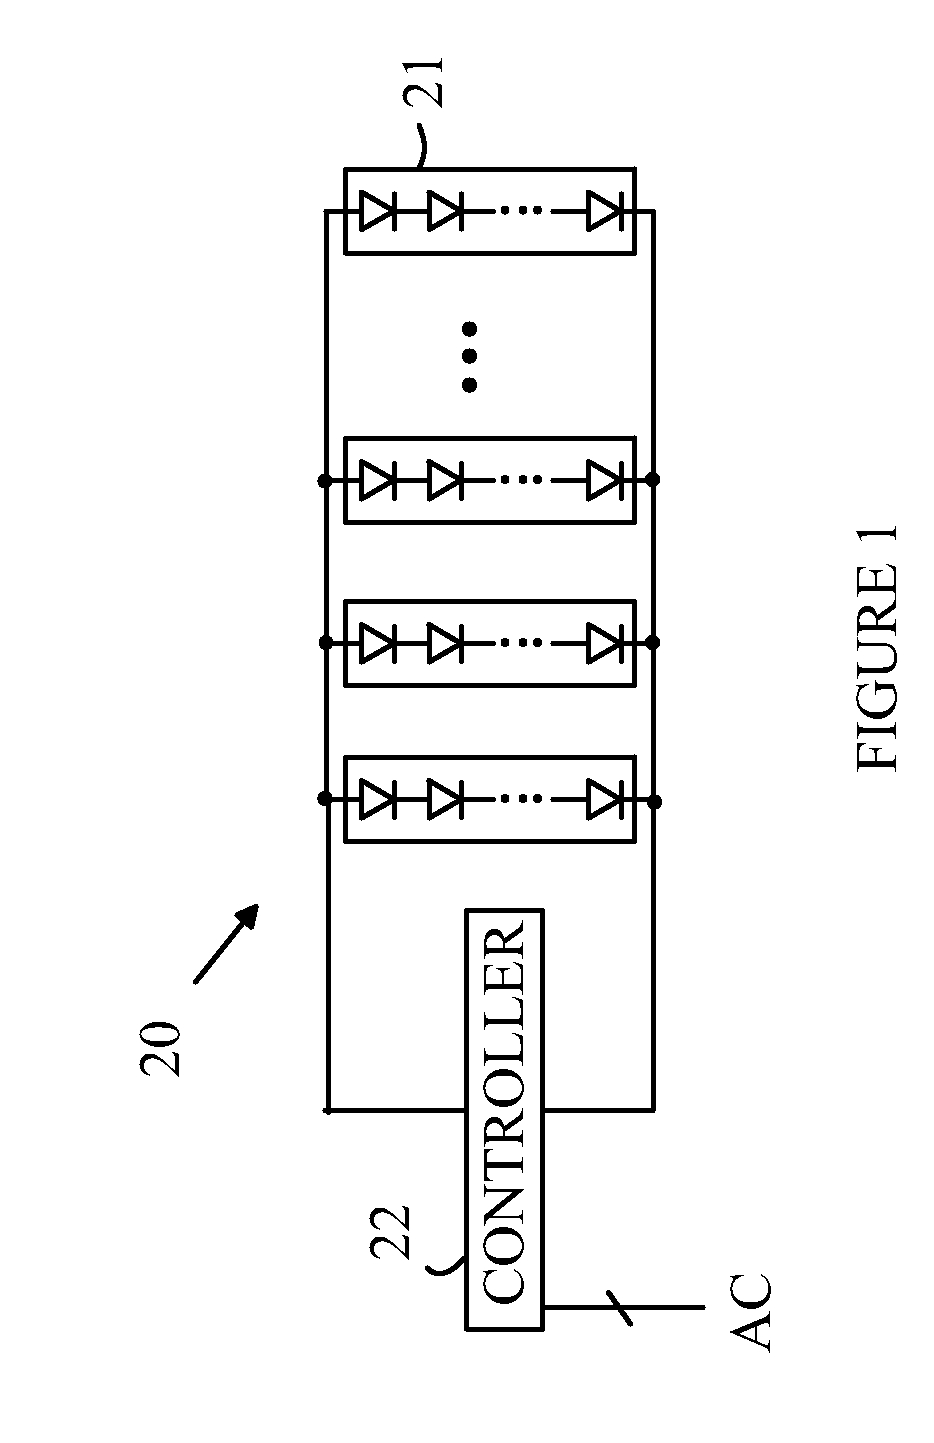 Light Sources Utilizing Segmented LEDs to Compensate for Manufacturing Variations in the Light Output of Individual Segmented LEDs